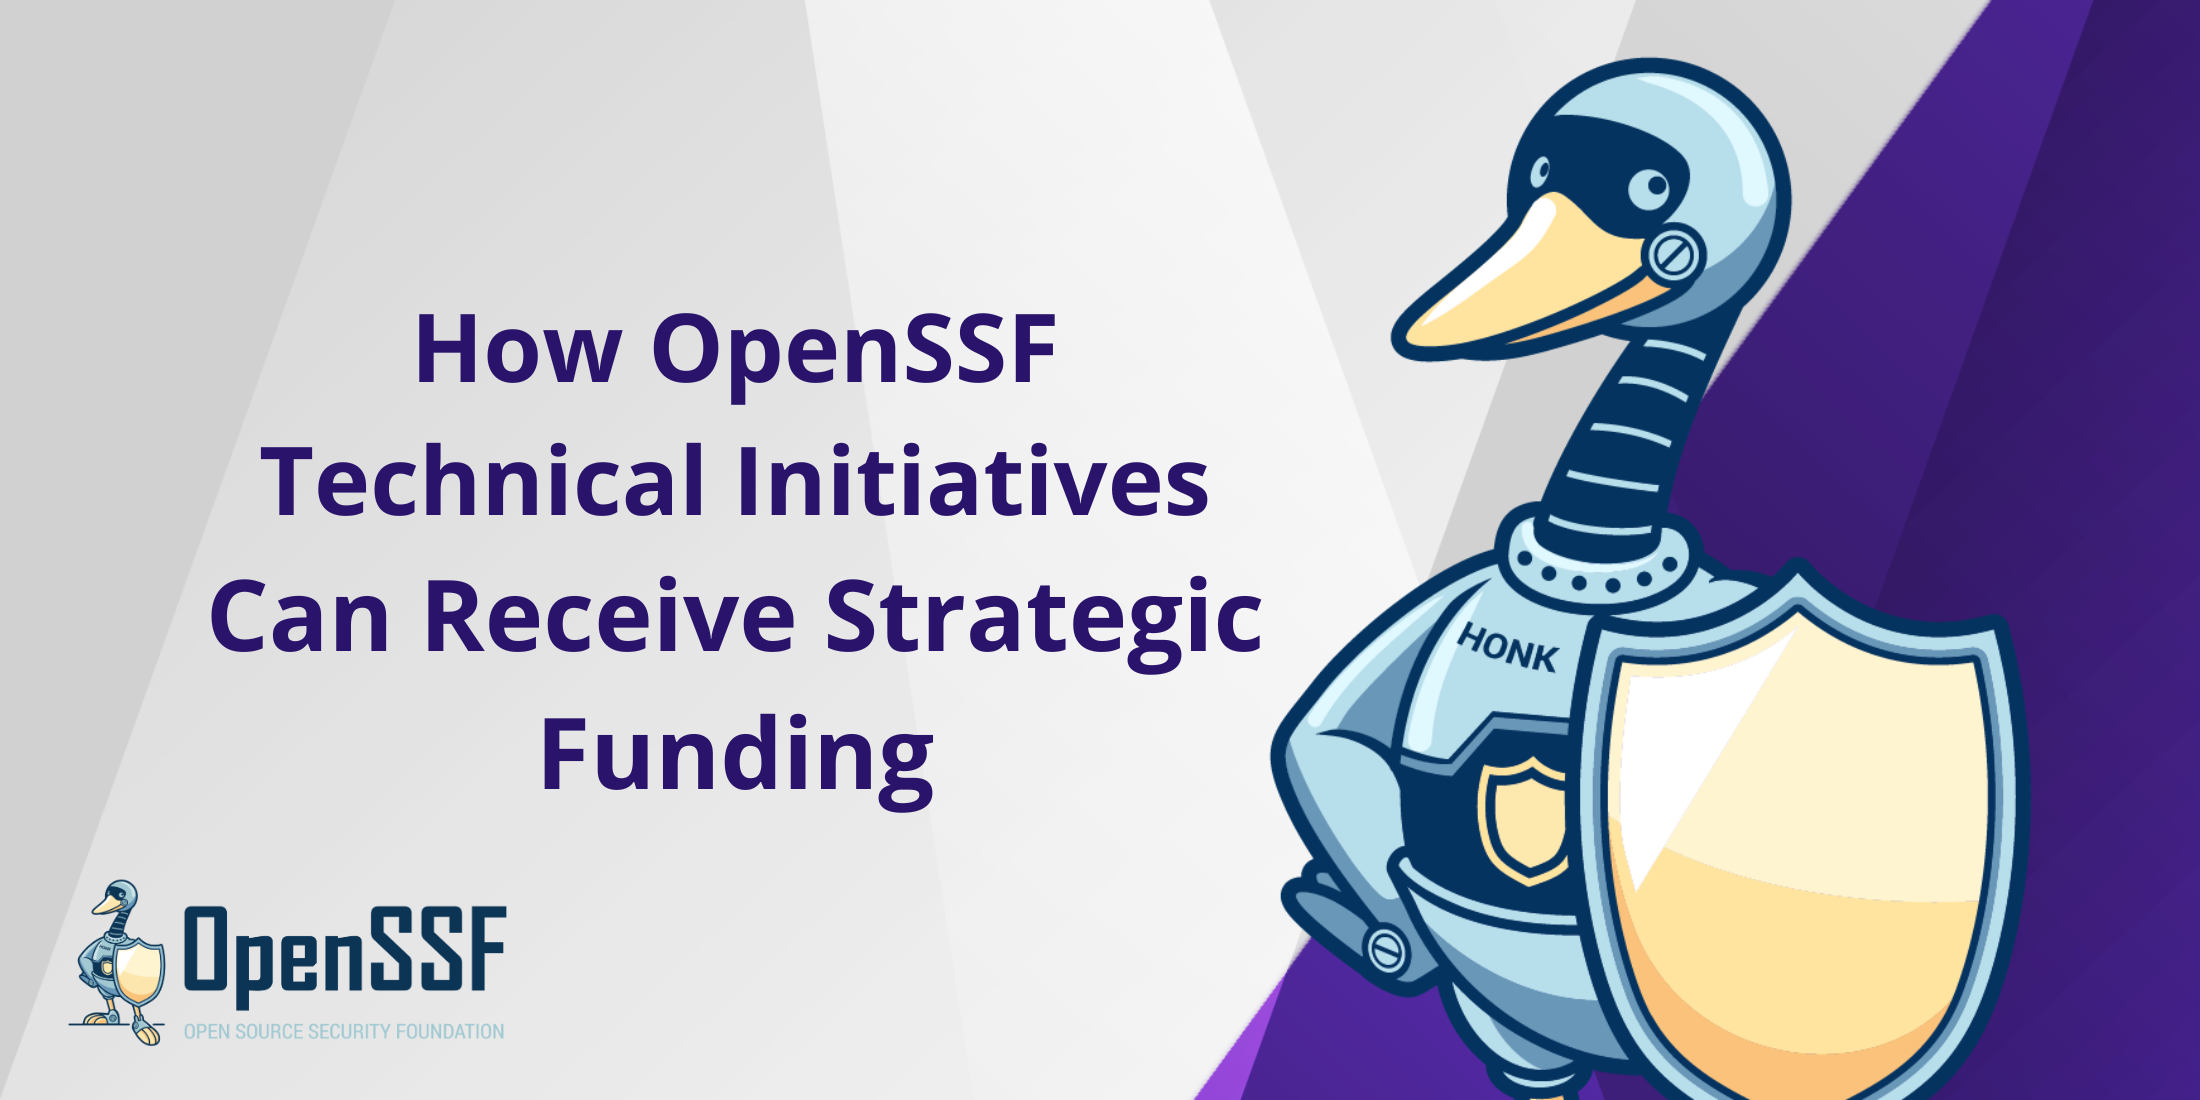 How OpenSSF Technical Initiatives Can Receive Strategic Funding